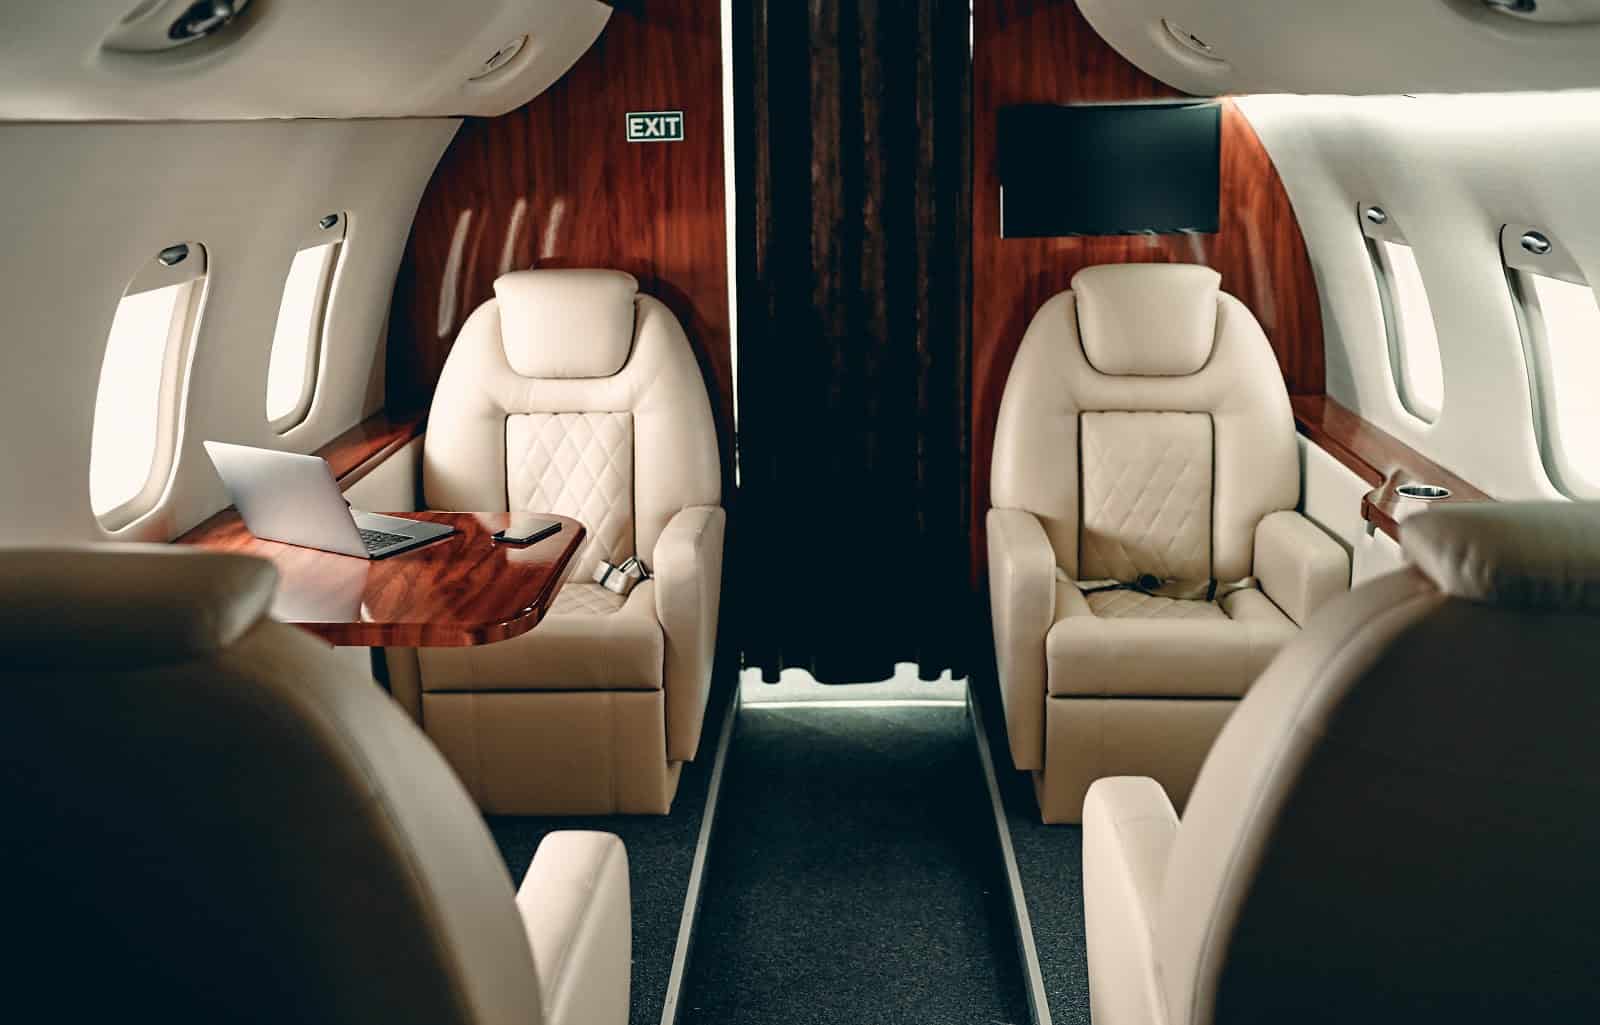 NetJets: The cabin of a private jet